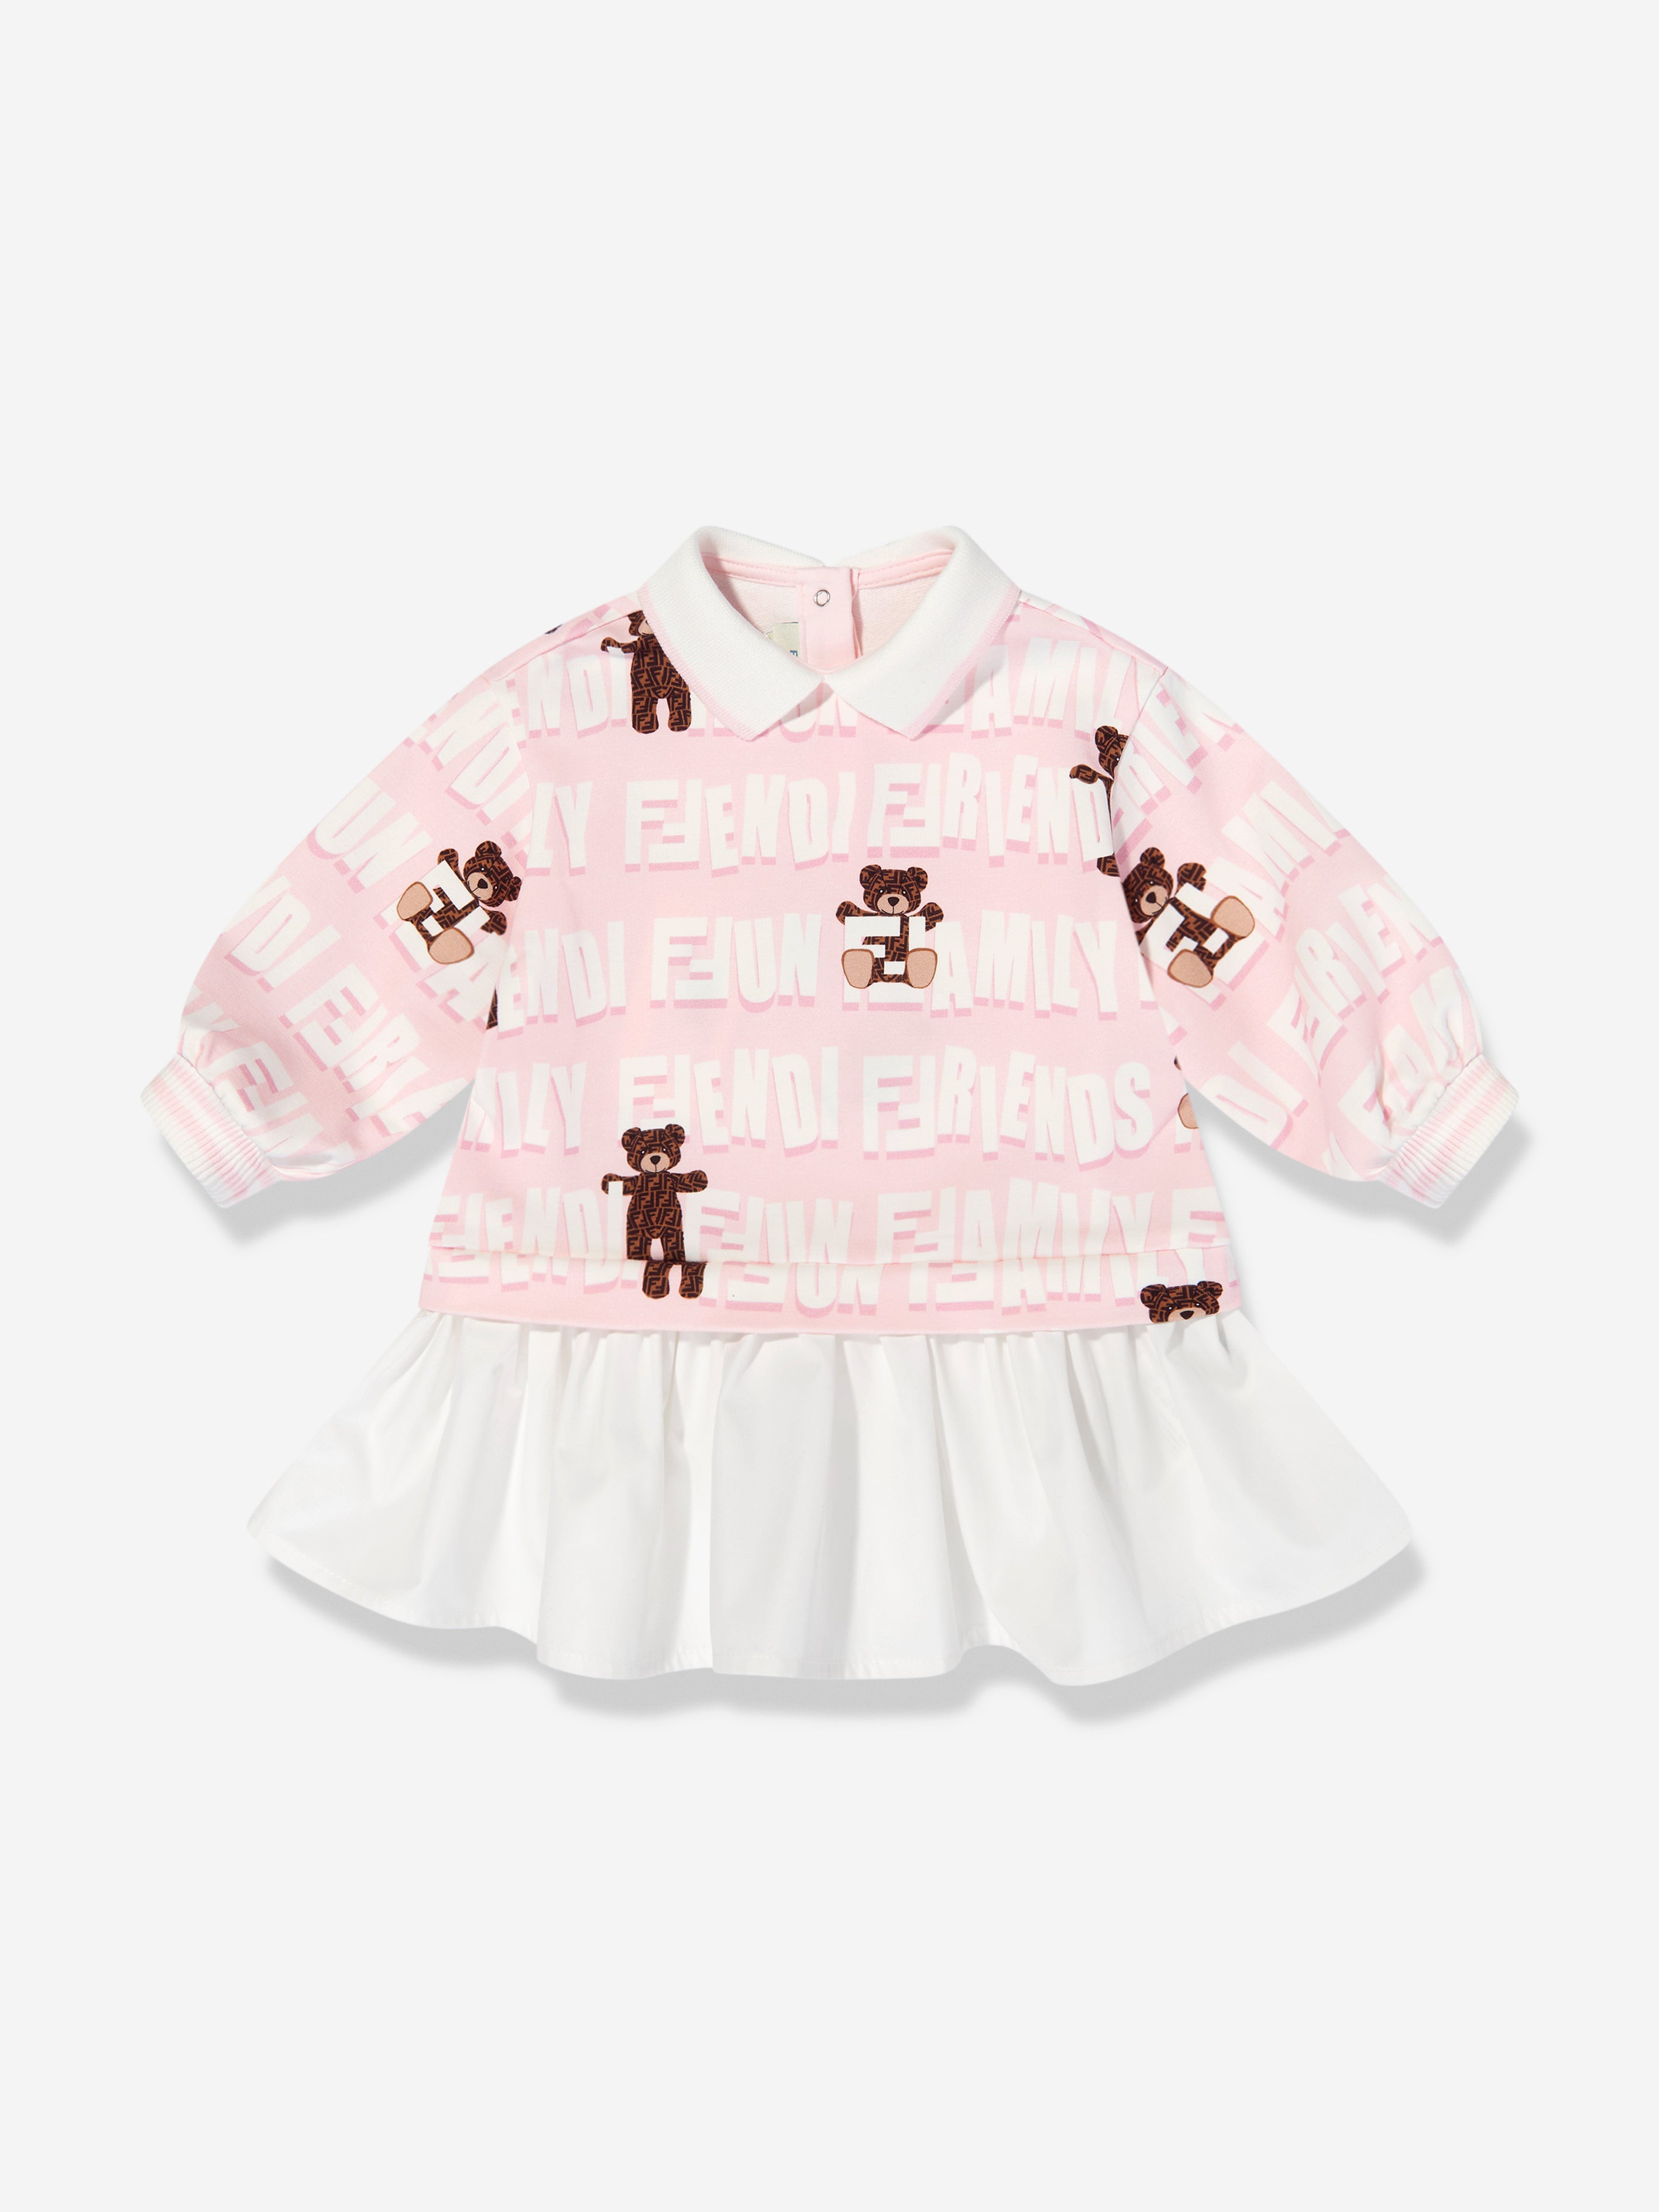 Givenchy Kids Clothes  Childsplay Clothing US